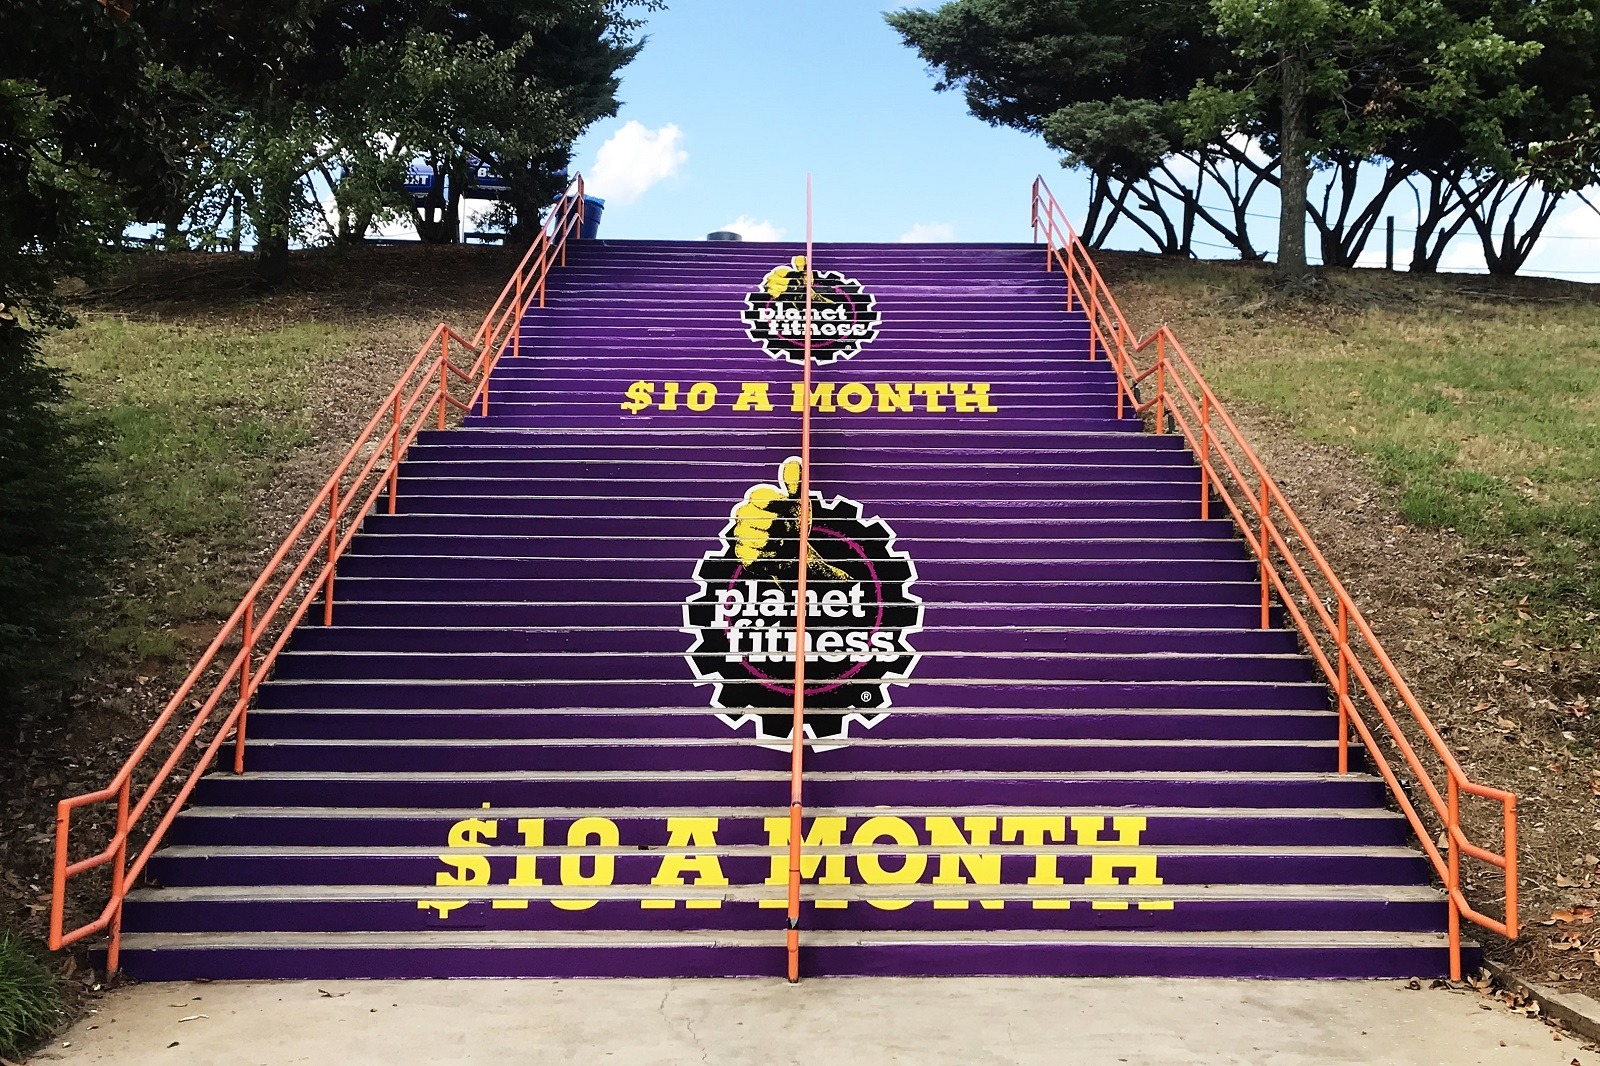 Get outdoors , Planet Fitness Stairs and Event Displays